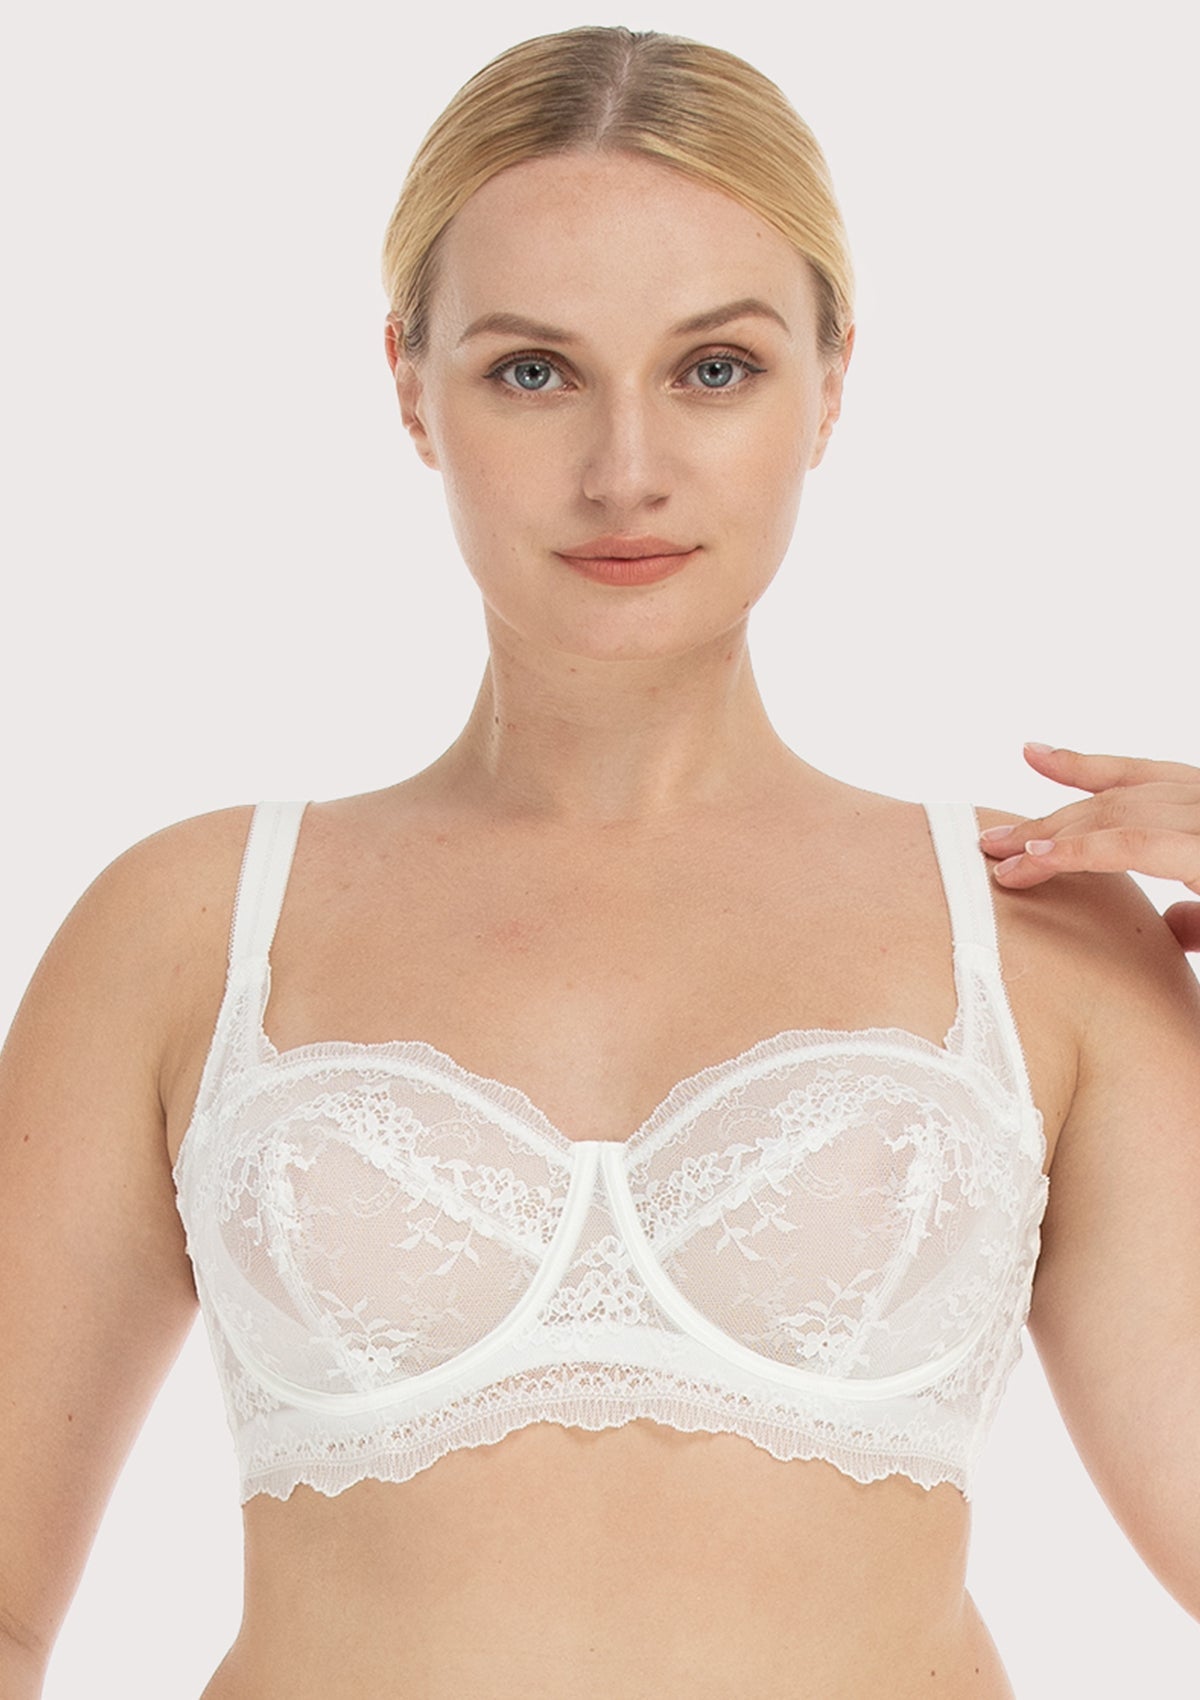 HSIA I Do Floral Lace Bridal Balconette Beautiful Bra For Special Day - Burgundy / 34 / DD/E